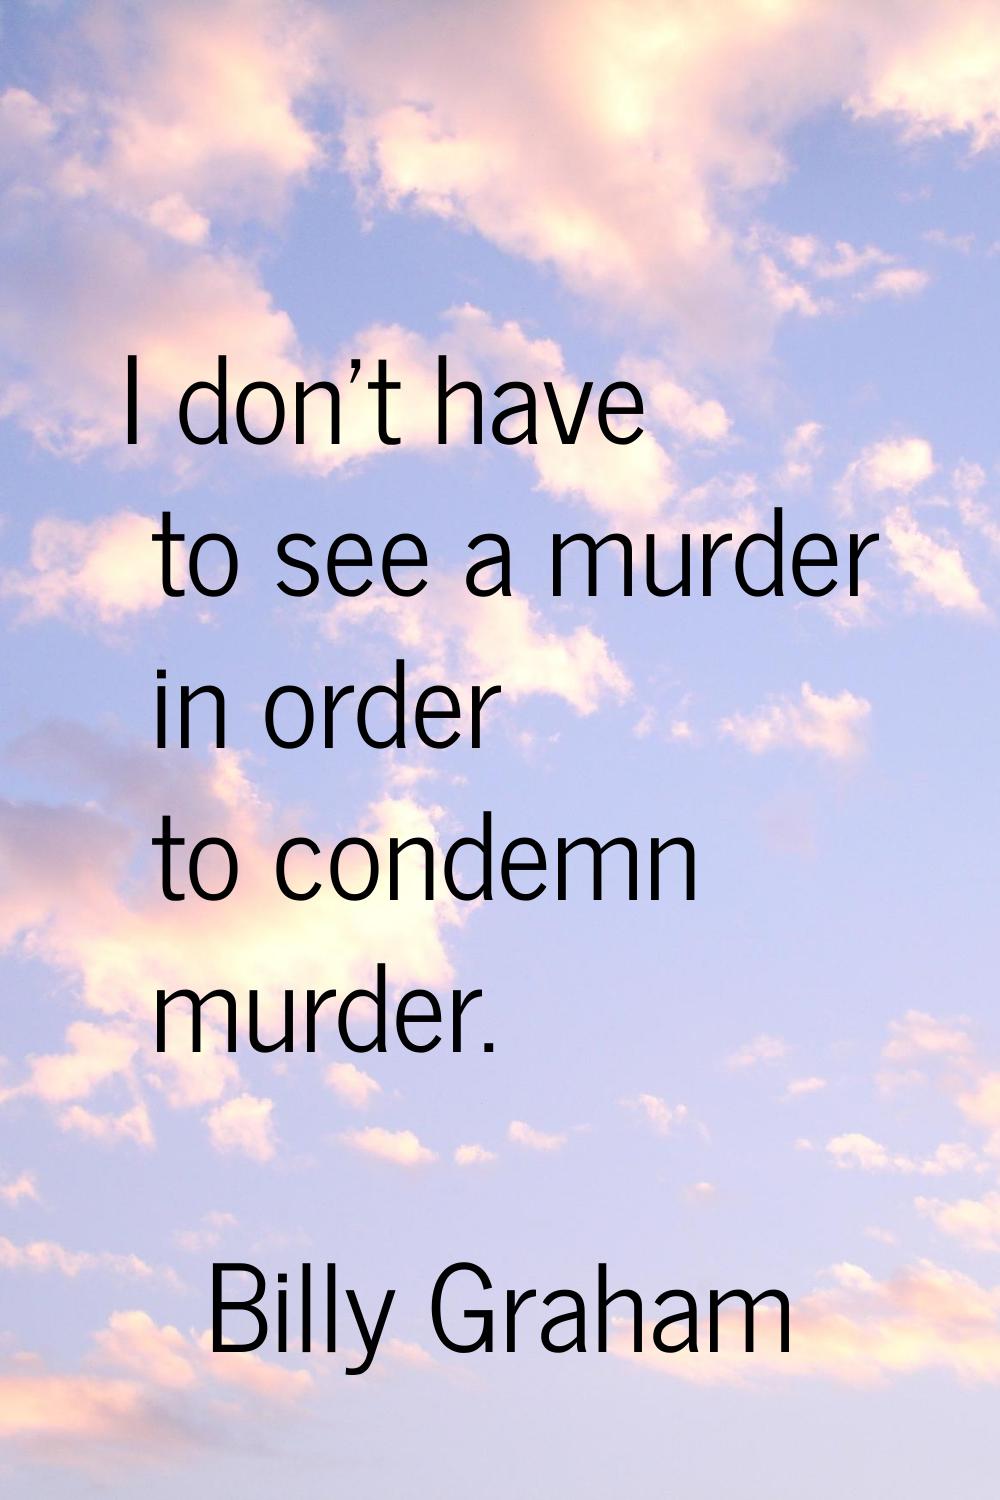 I don't have to see a murder in order to condemn murder.